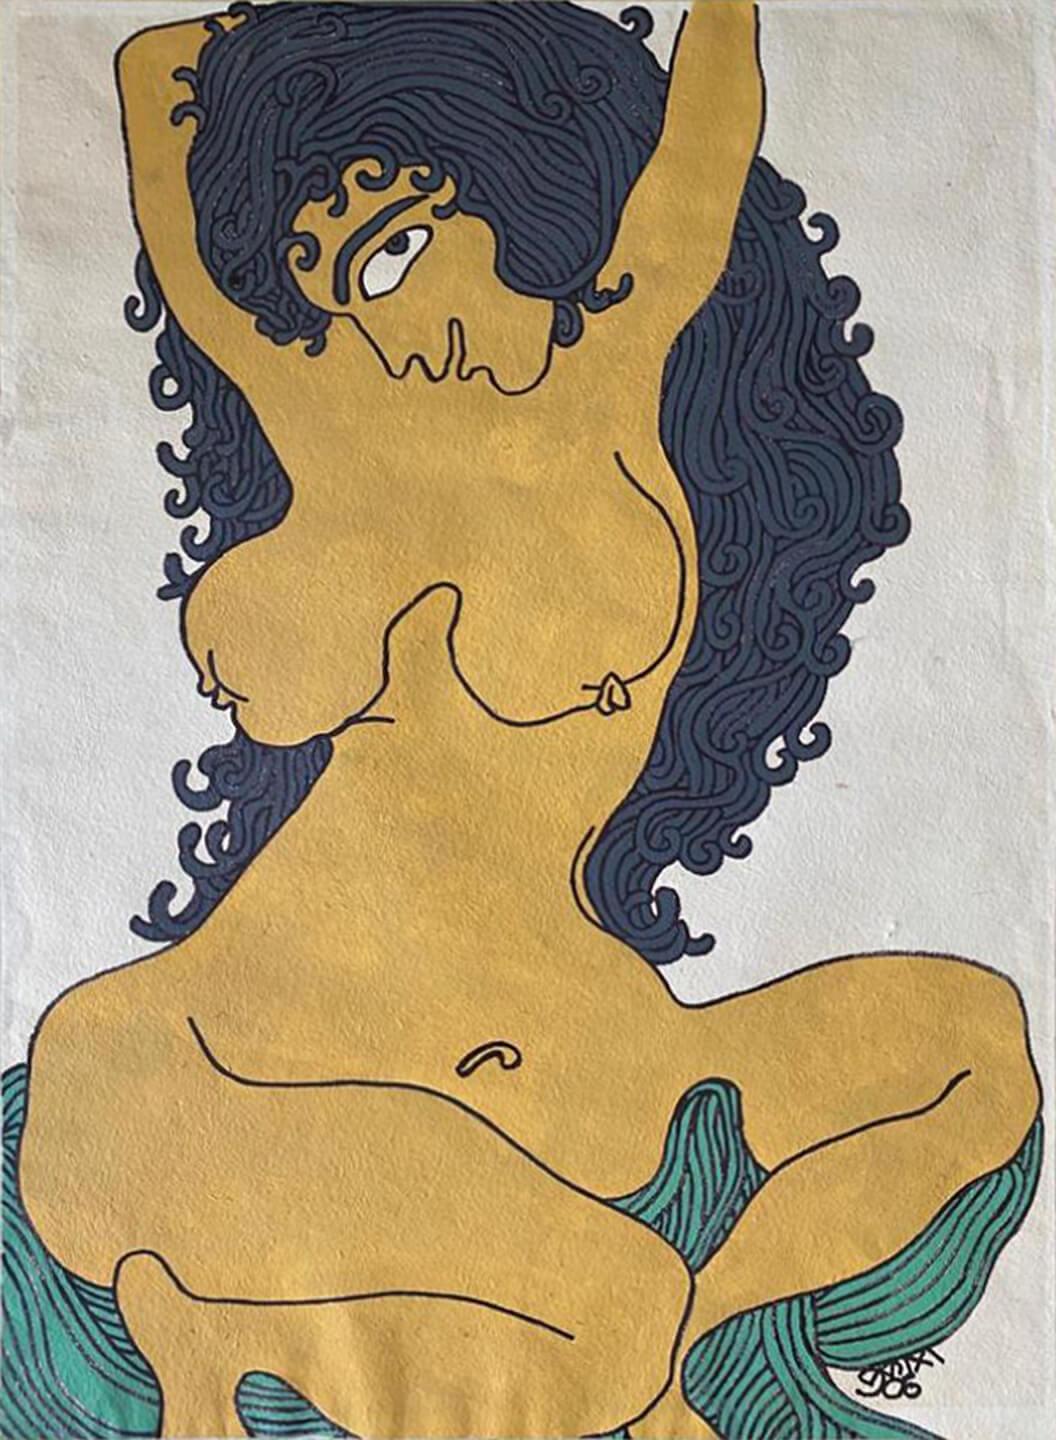 Nude, Acrylic on Paper by Modern Indian Artist “In Stock”